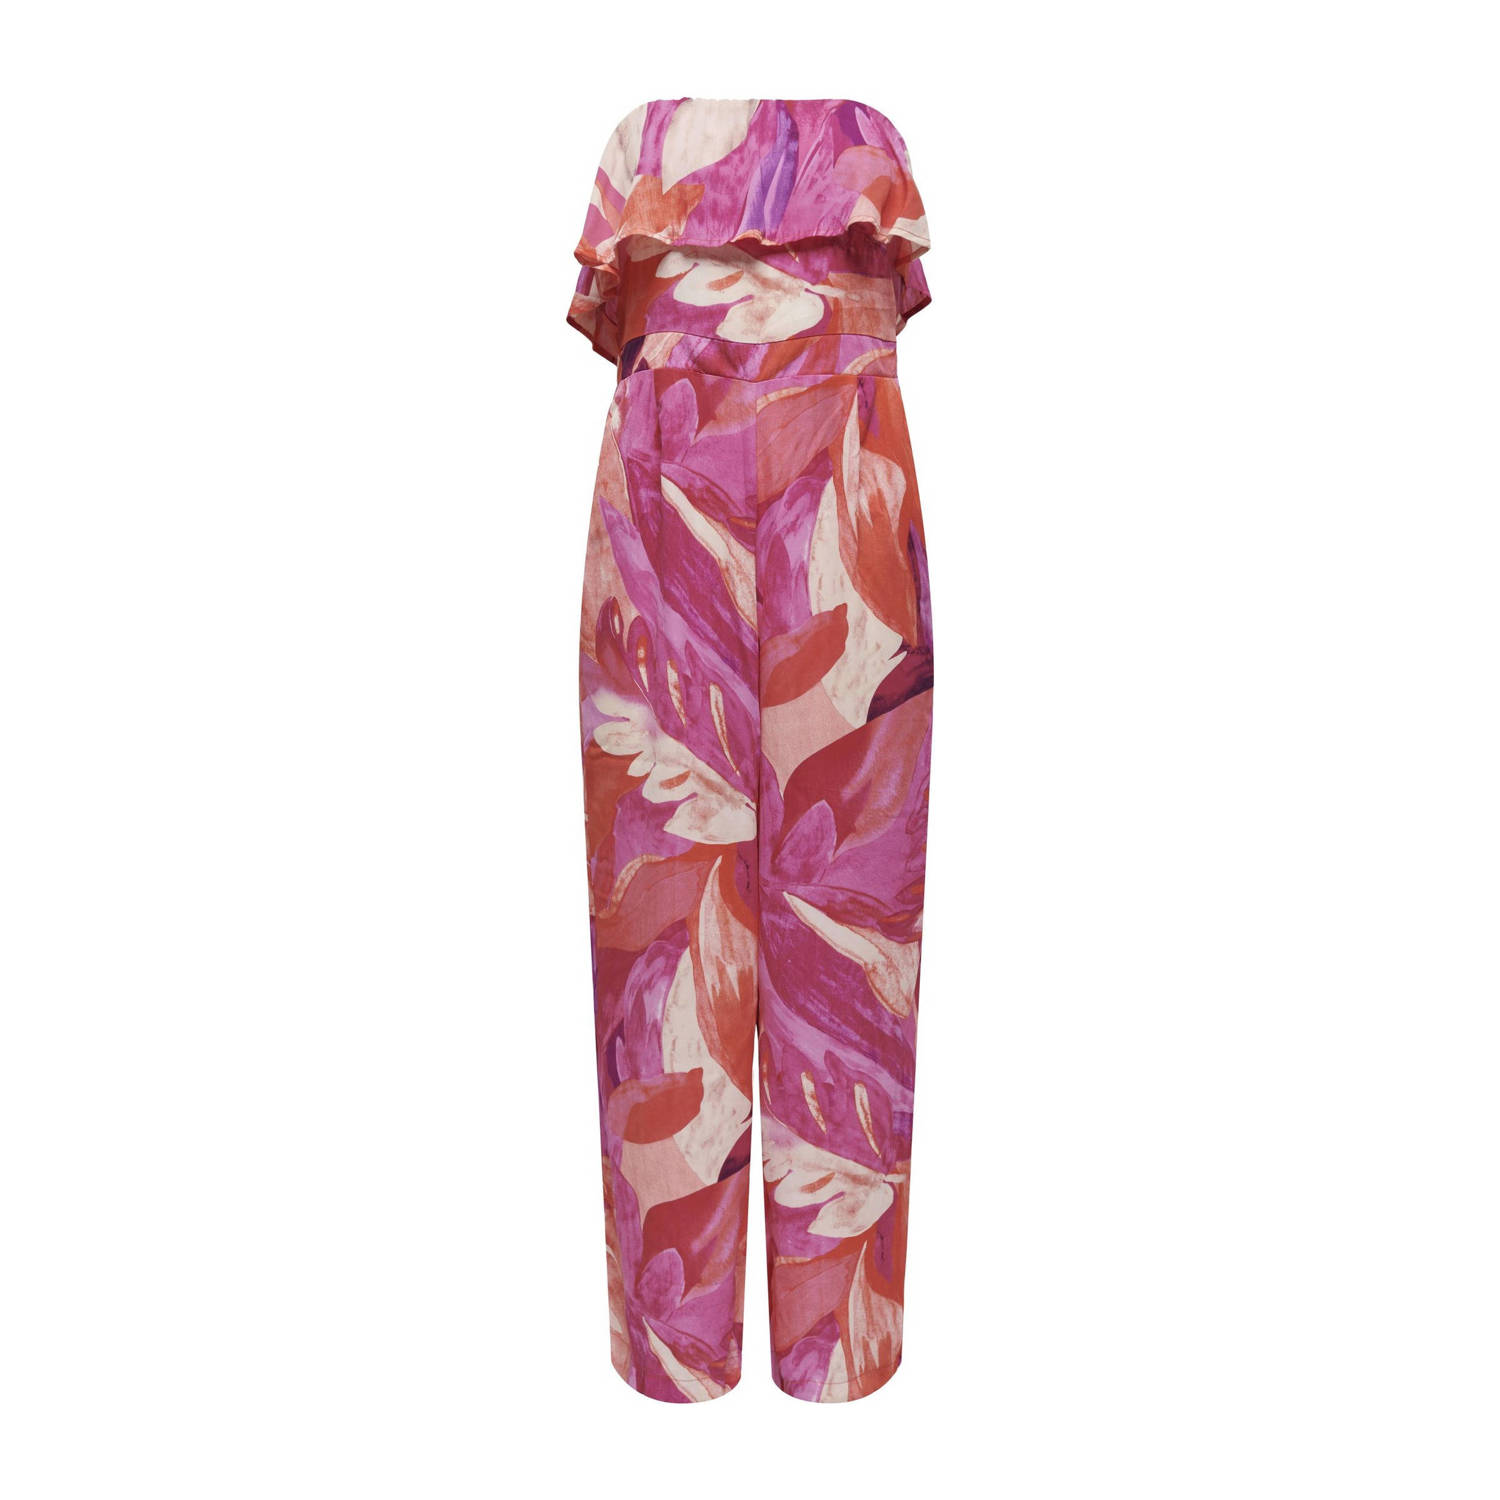 ONLY jumpsuit met all over print paars roze